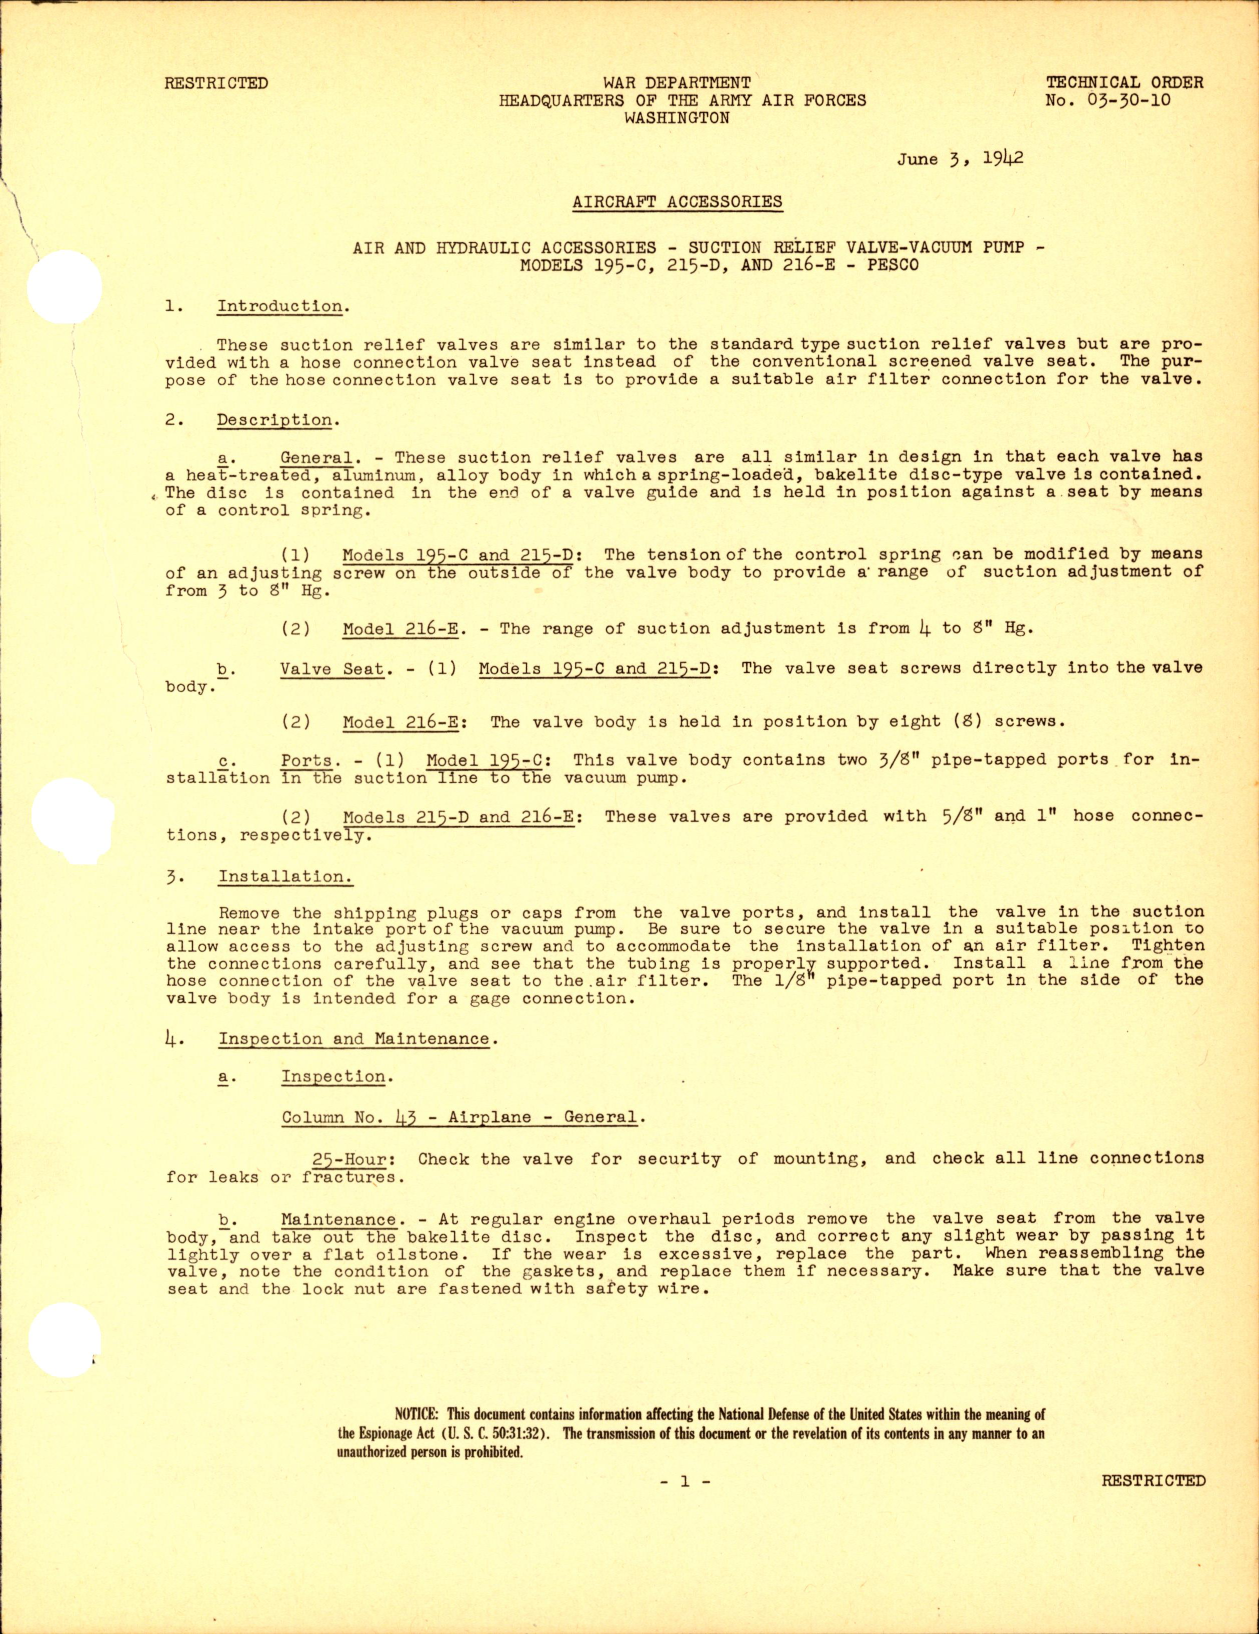 Sample page 1 from AirCorps Library document: Suction Relief Valve Vacuum Pump for Models 195-C, 215-D, and 216-E 